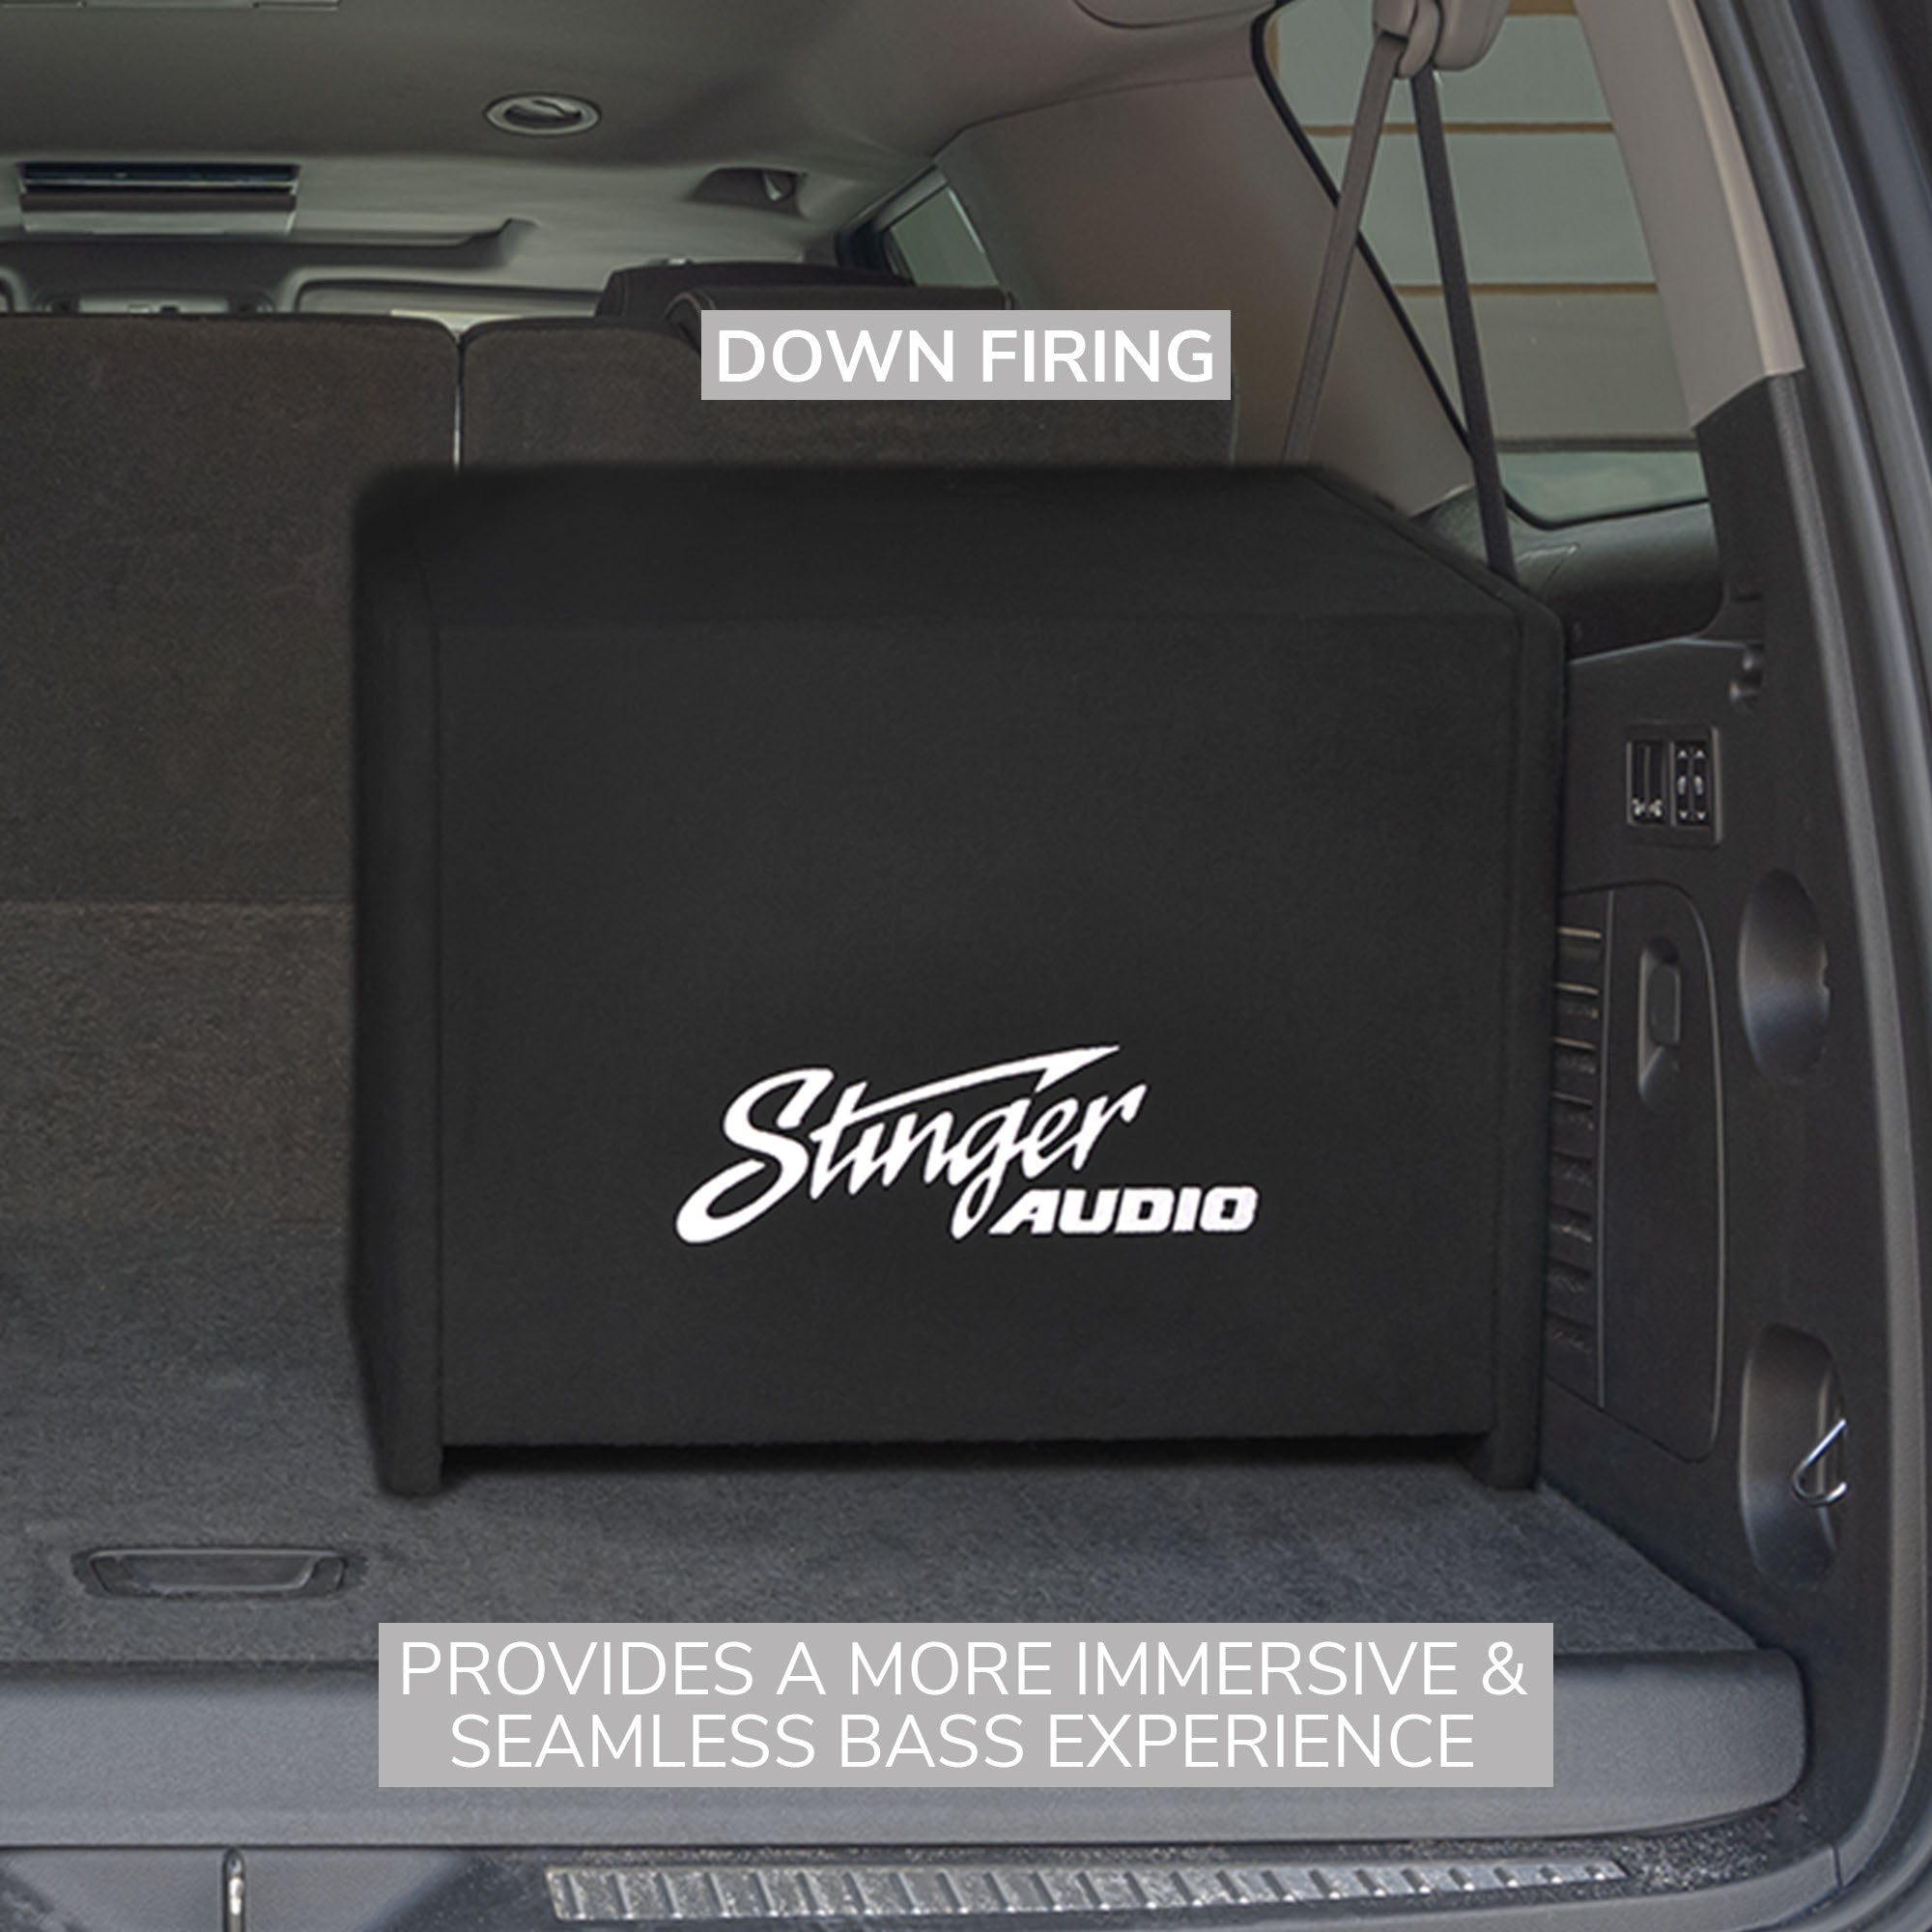 Single 12" 700 Watt (RMS) Loaded Ported Subwoofer Enclosure (700 Watts RMS/1,200 Watts Max) Bass Package with Amplifier & Complete Wiring Kit